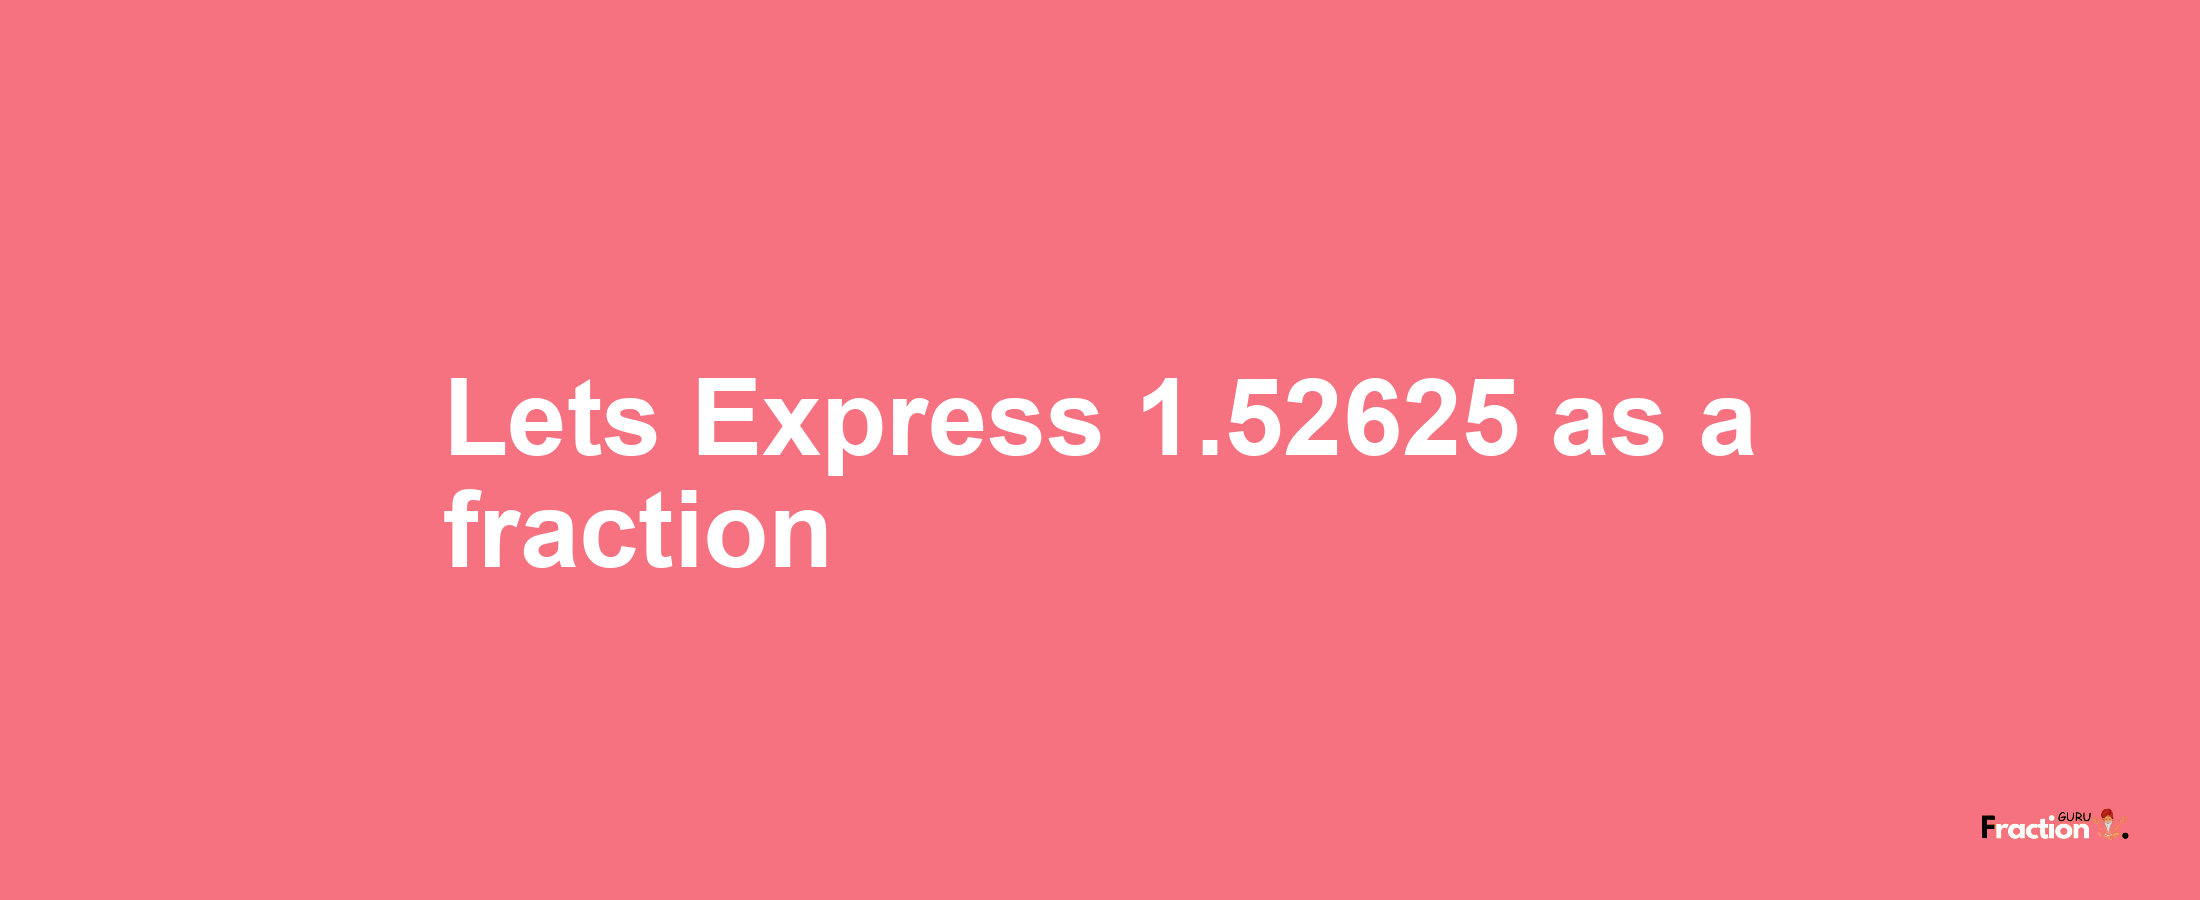 Lets Express 1.52625 as afraction